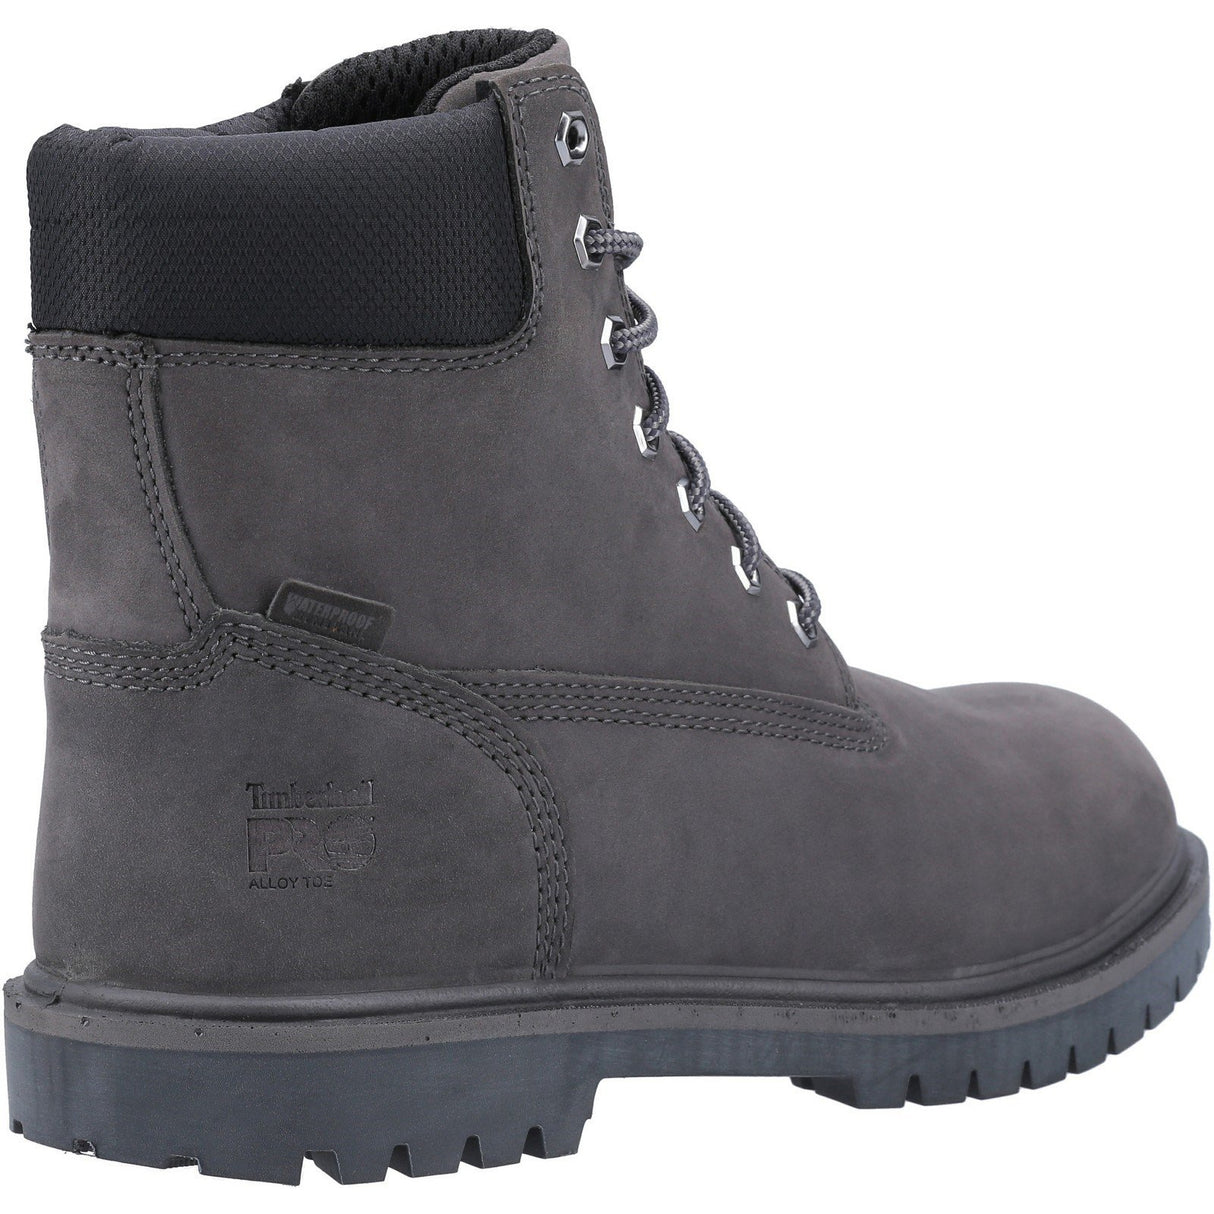 Timberland Pro Iconic Safety Boots